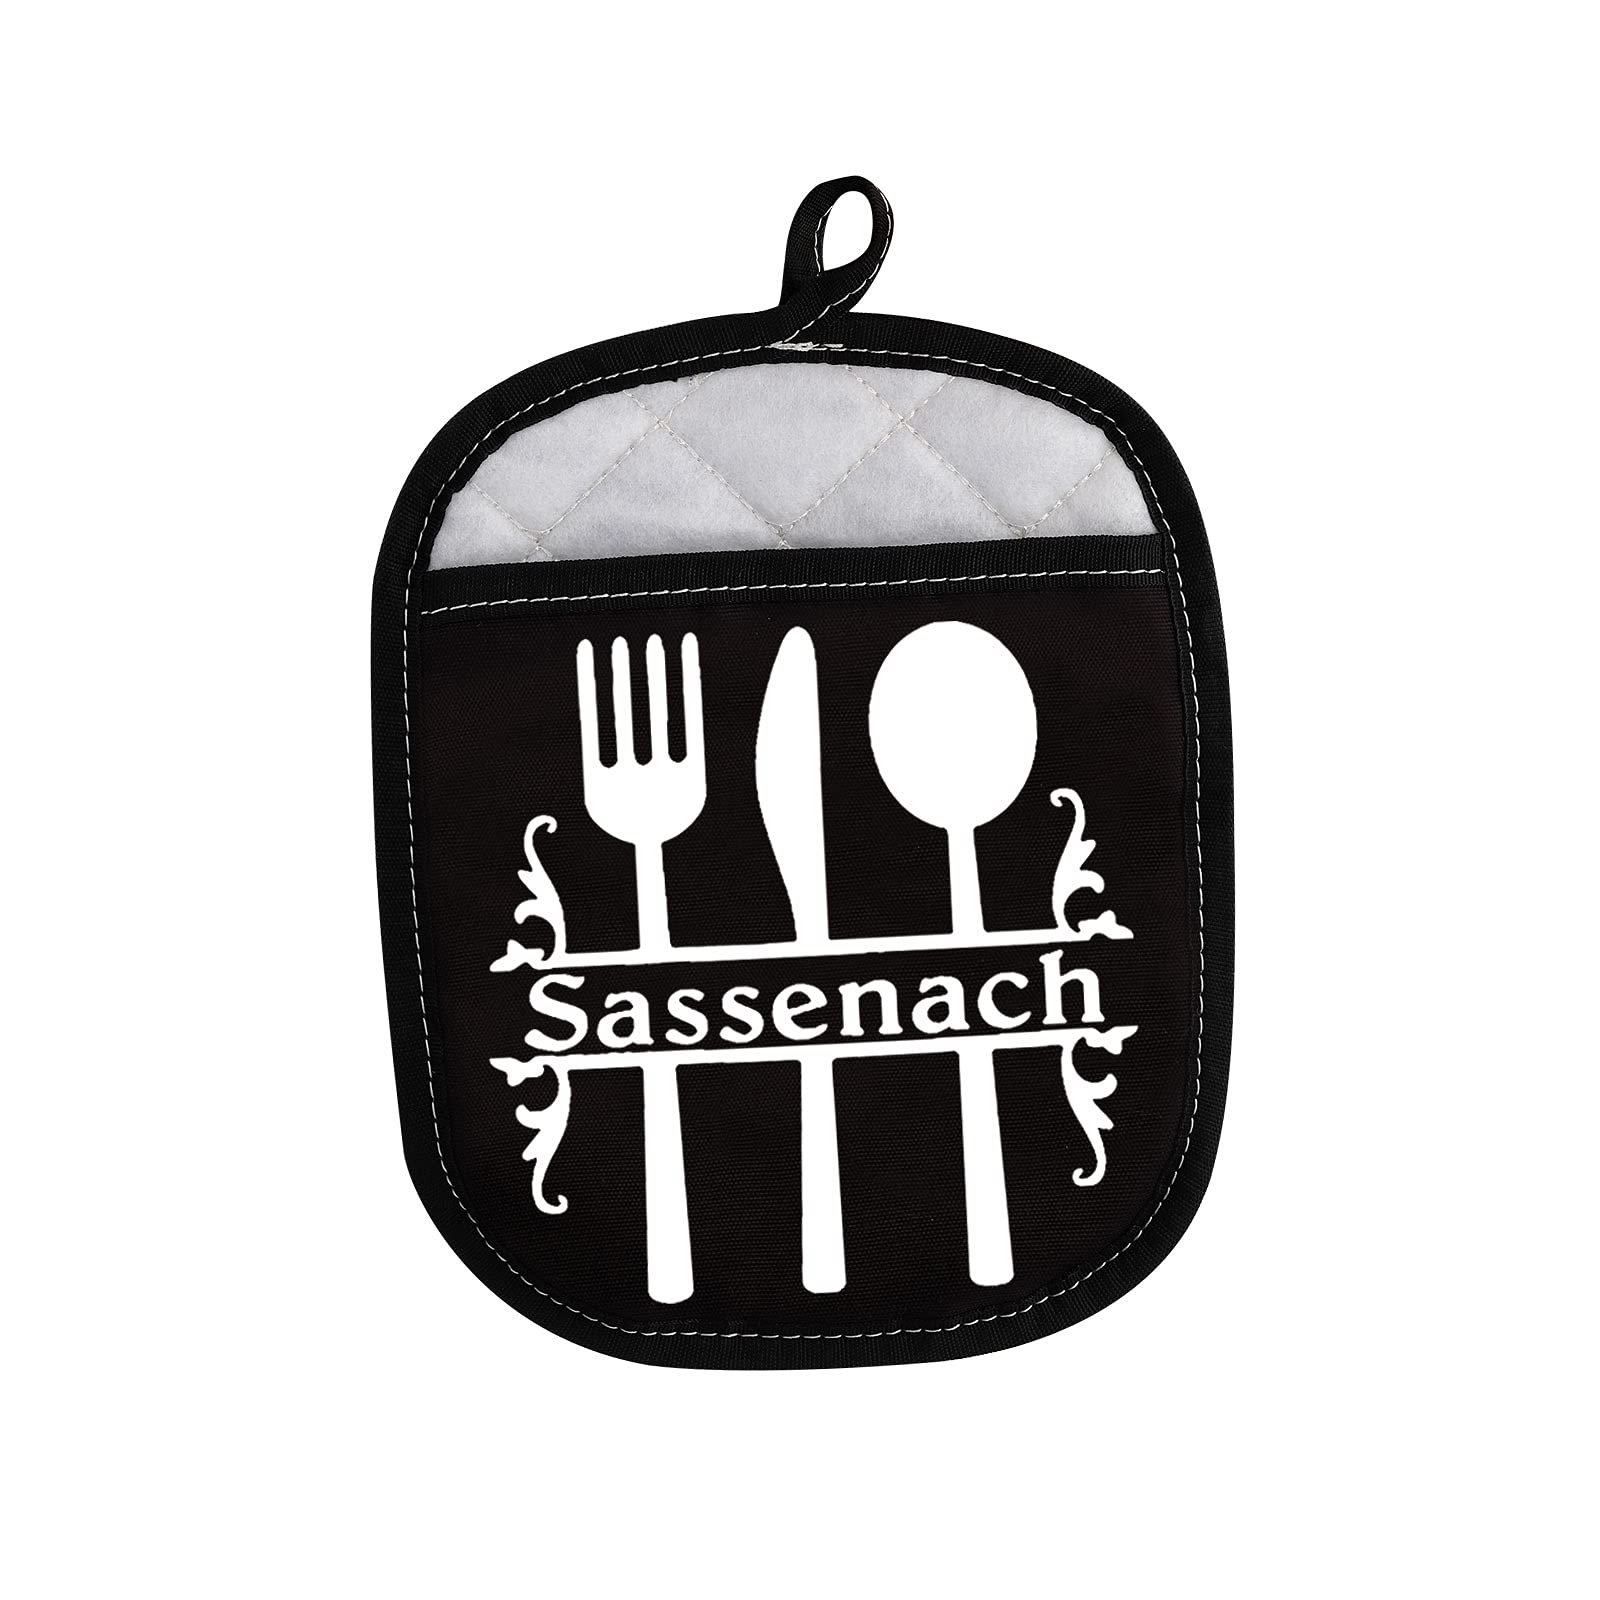 LEVLO Dragonfly Fans Gifts Sassenach Pot Holders Dragonfly Lover Gifts Friend Sister Mother (Sassenach)